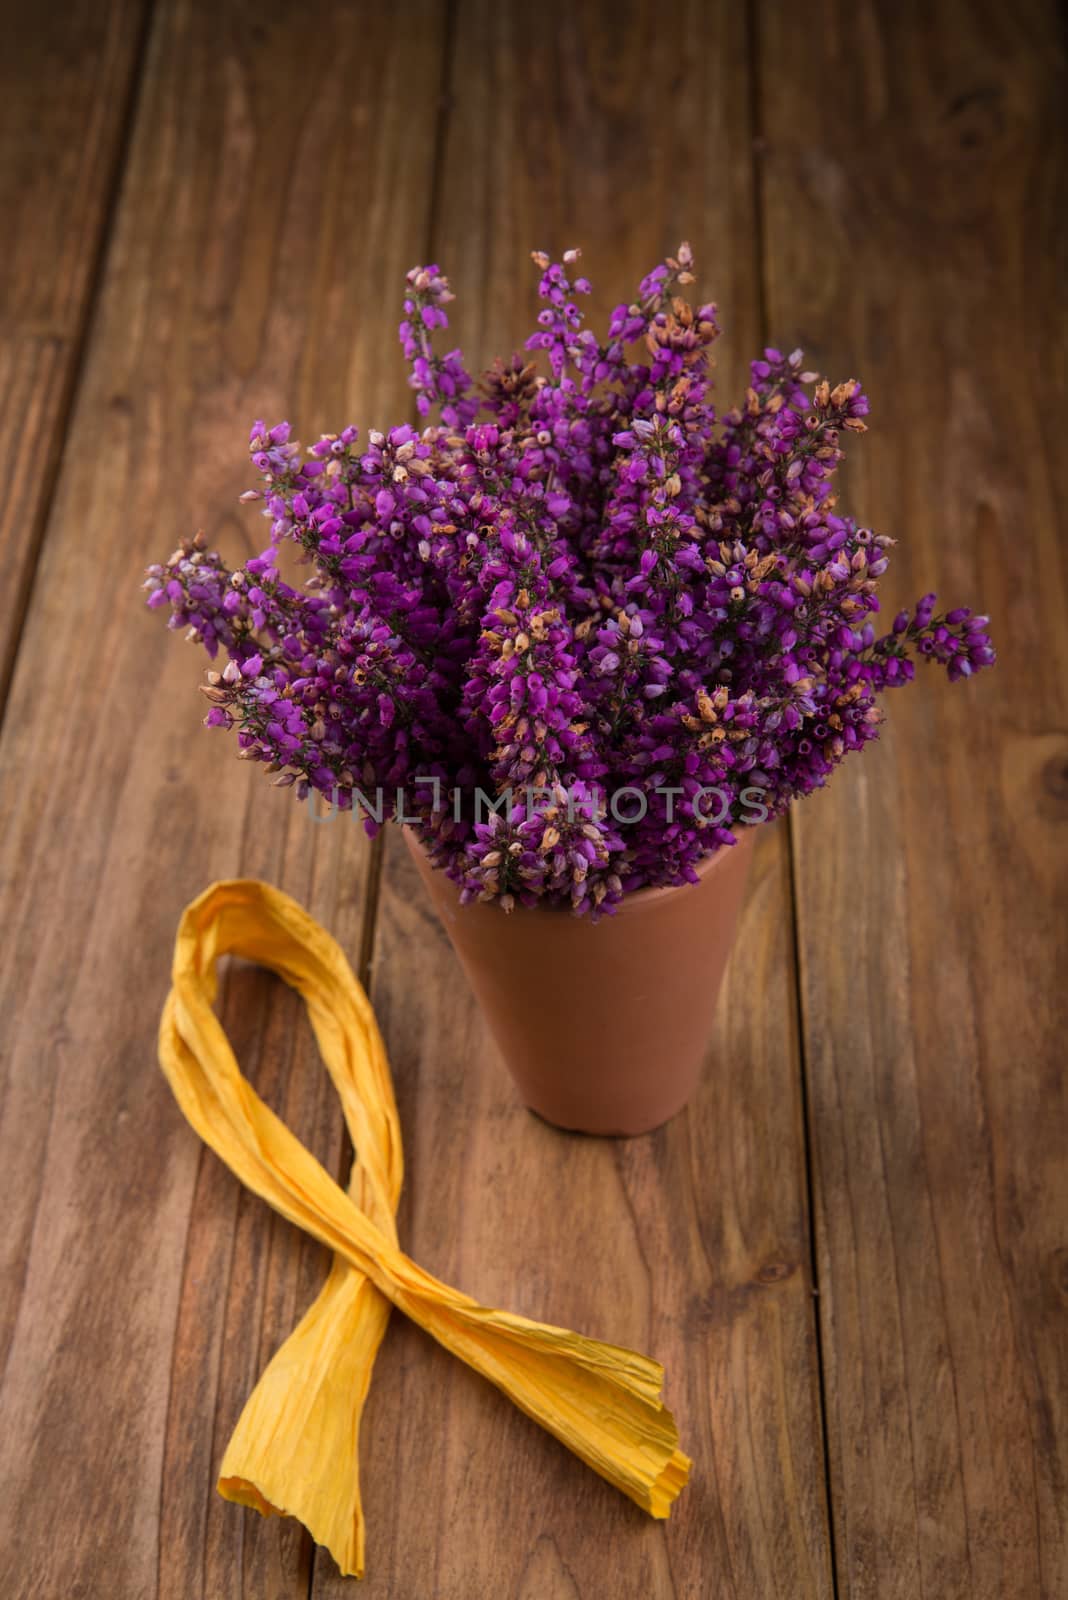 purple and viola heather flowers on wooden table in ceramic pot with yellow ribbon